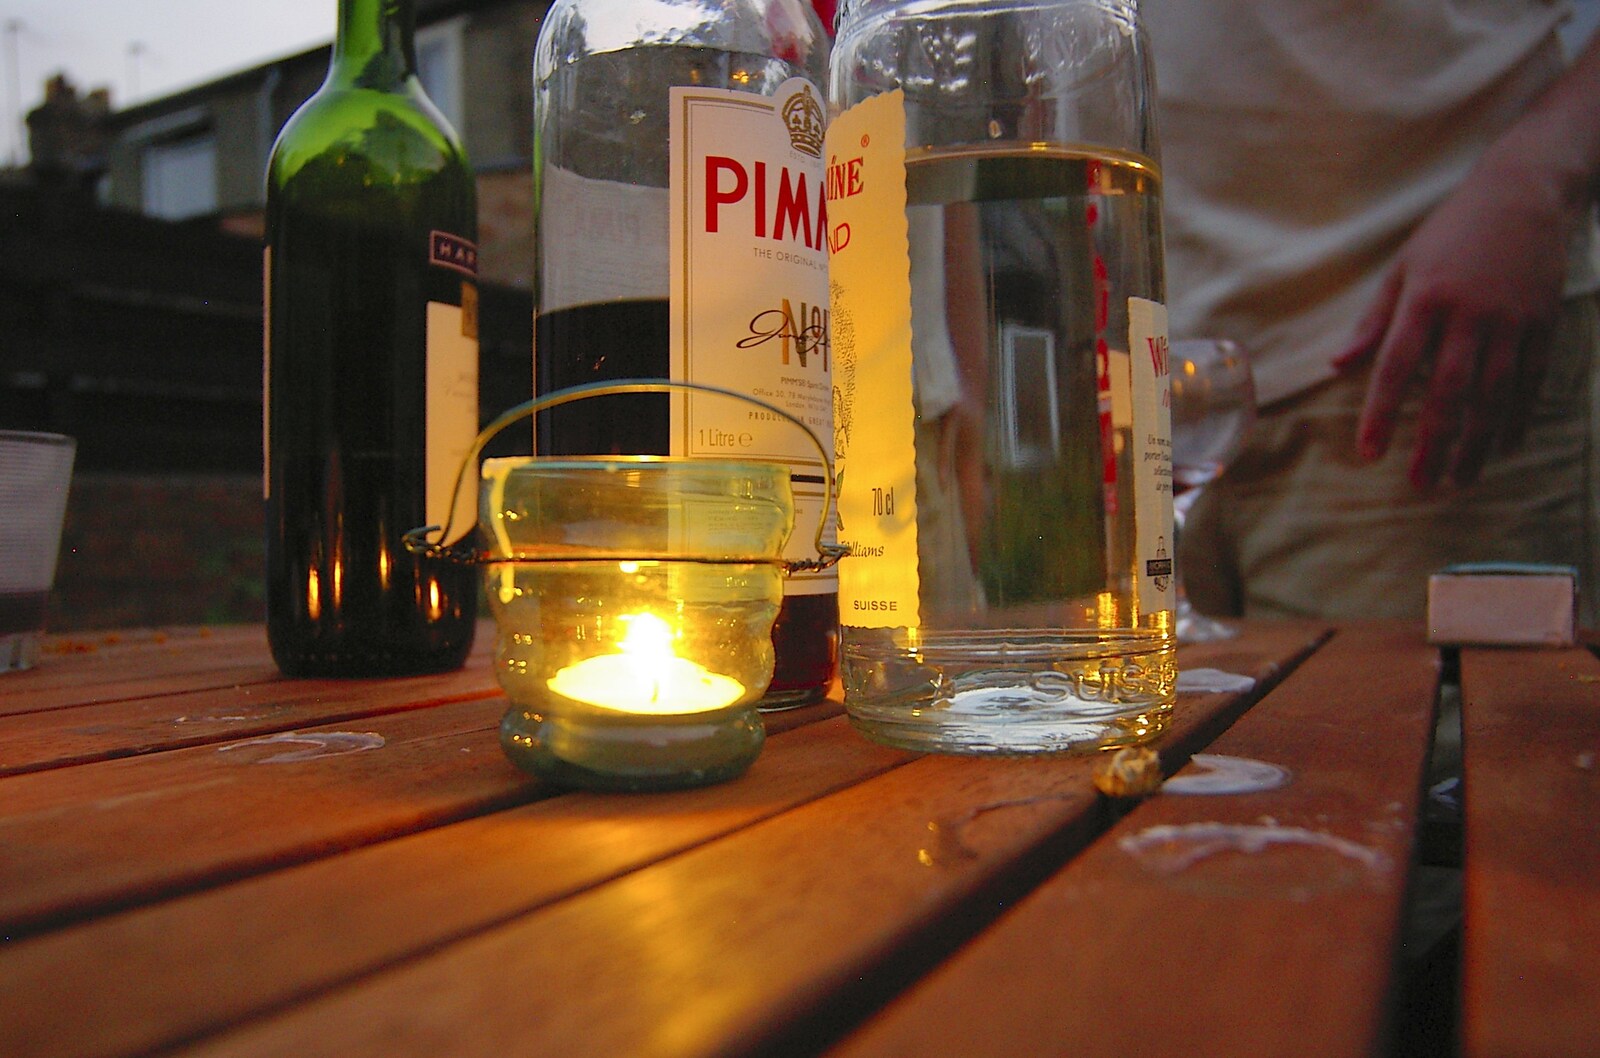 A tea-light illuminates a bottle of Pimms from A Kingston Street Barbeque with Rachel and Sam, North Romsey, Cambridge- 2nd August 2006